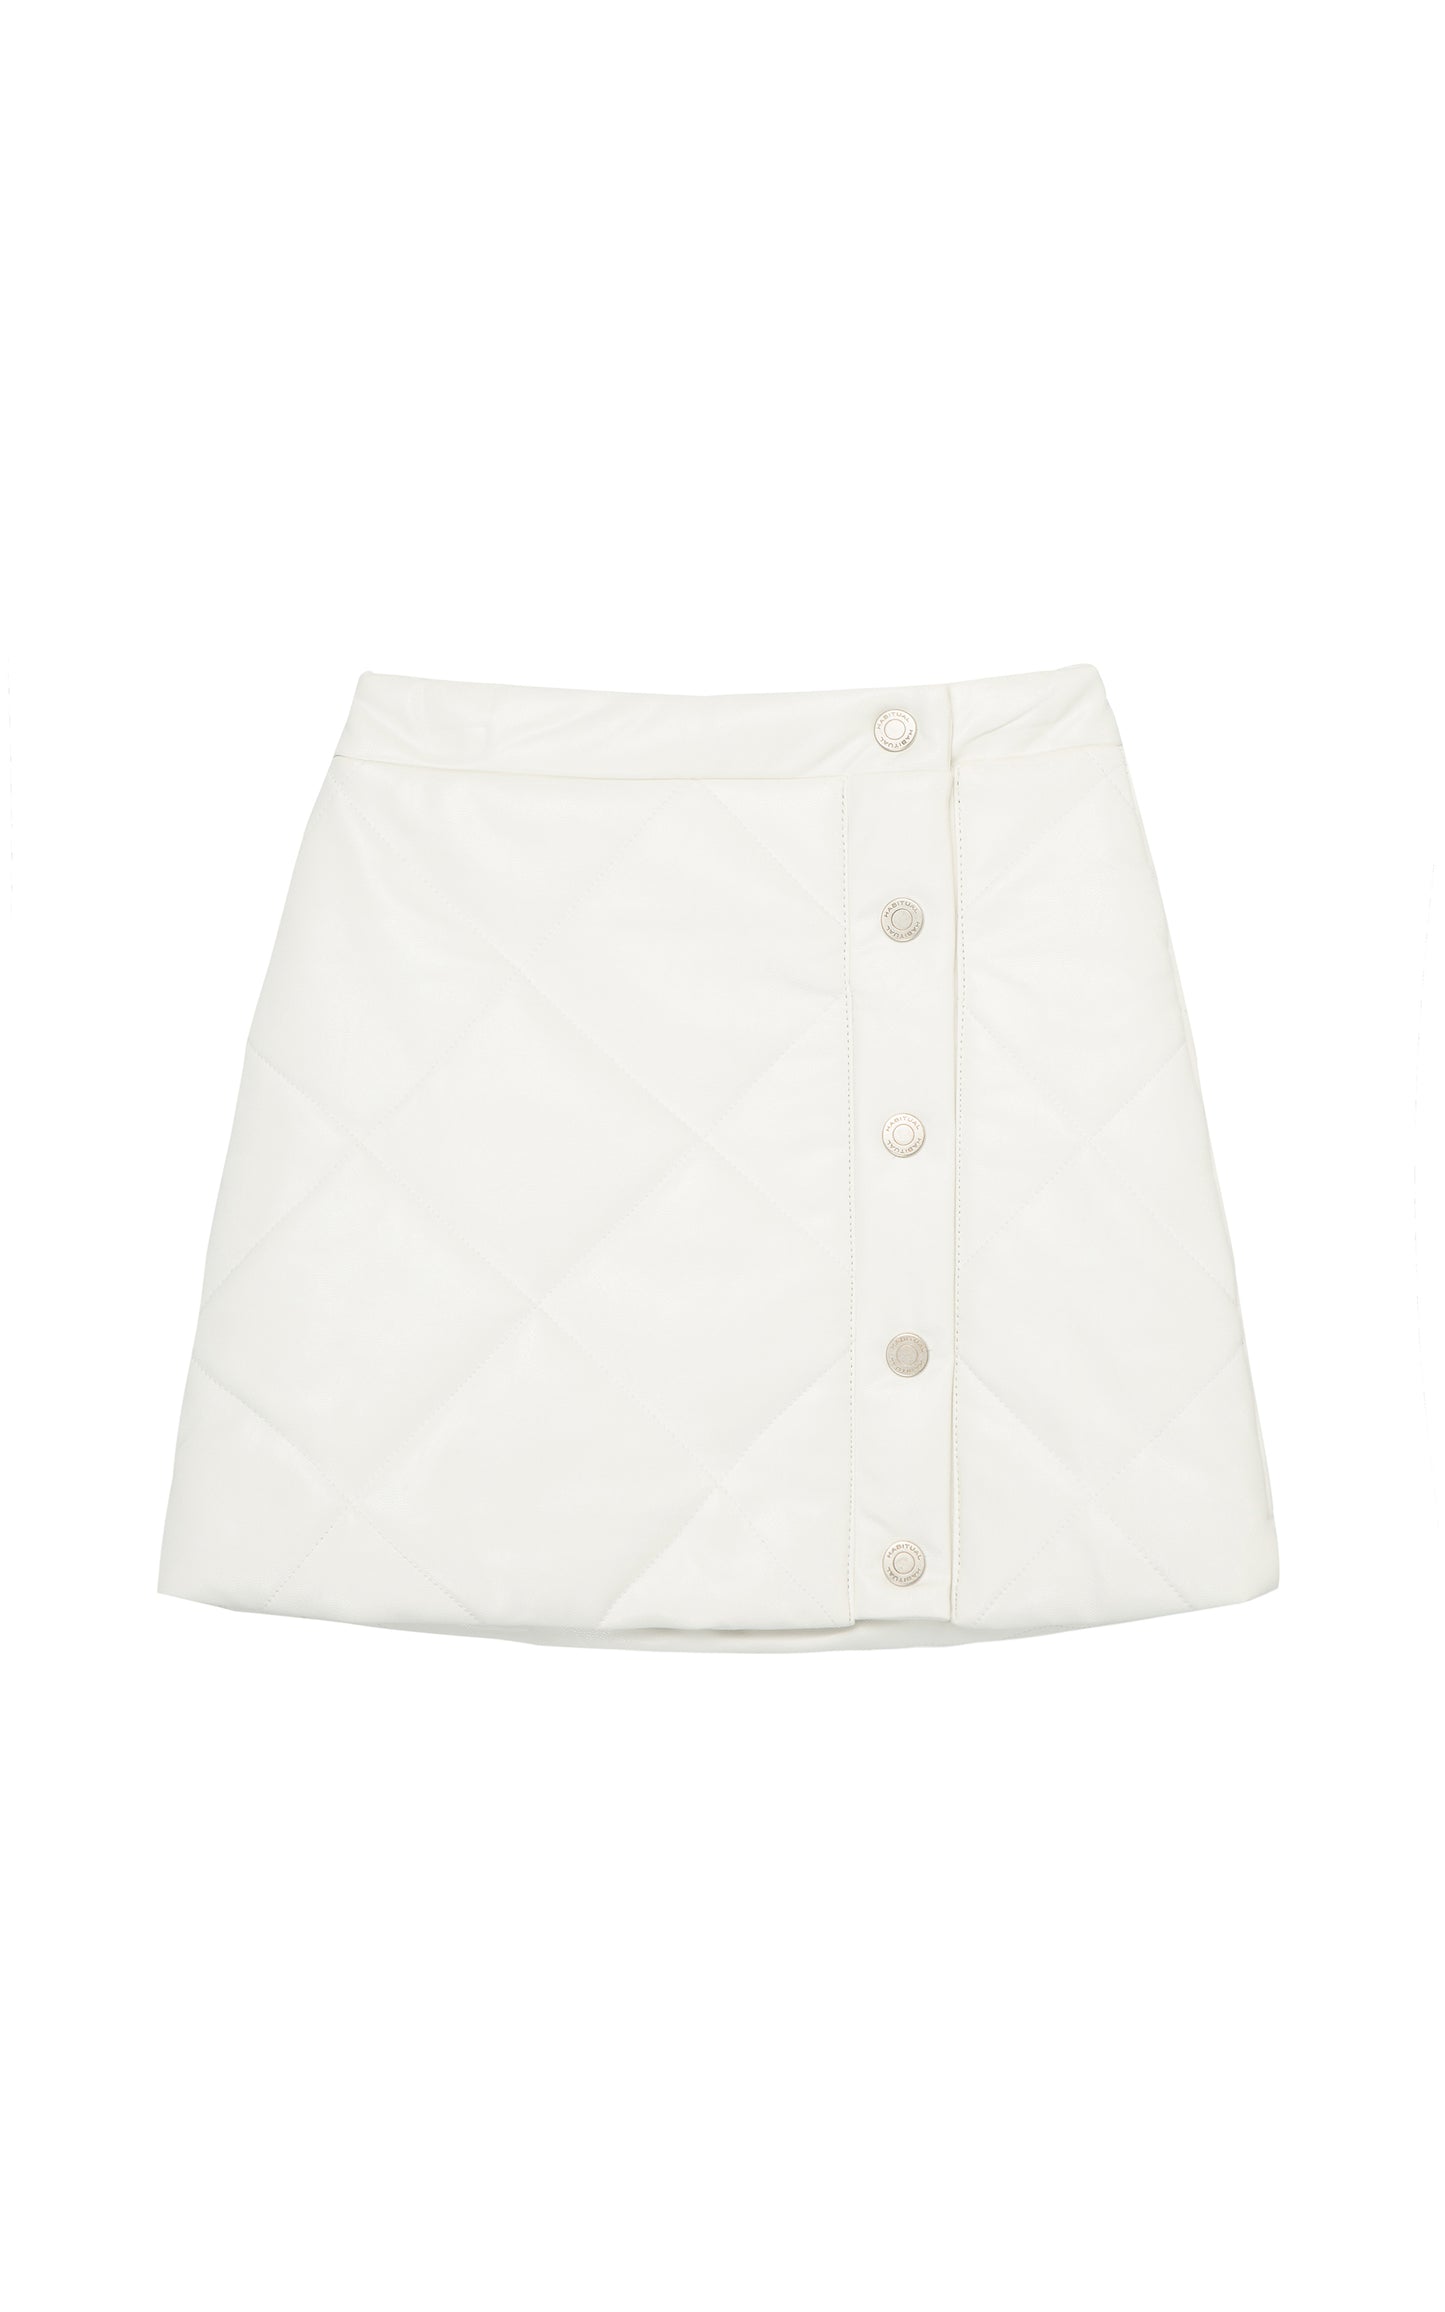 Front view of an off-white quilted faux leather skirt with snaps